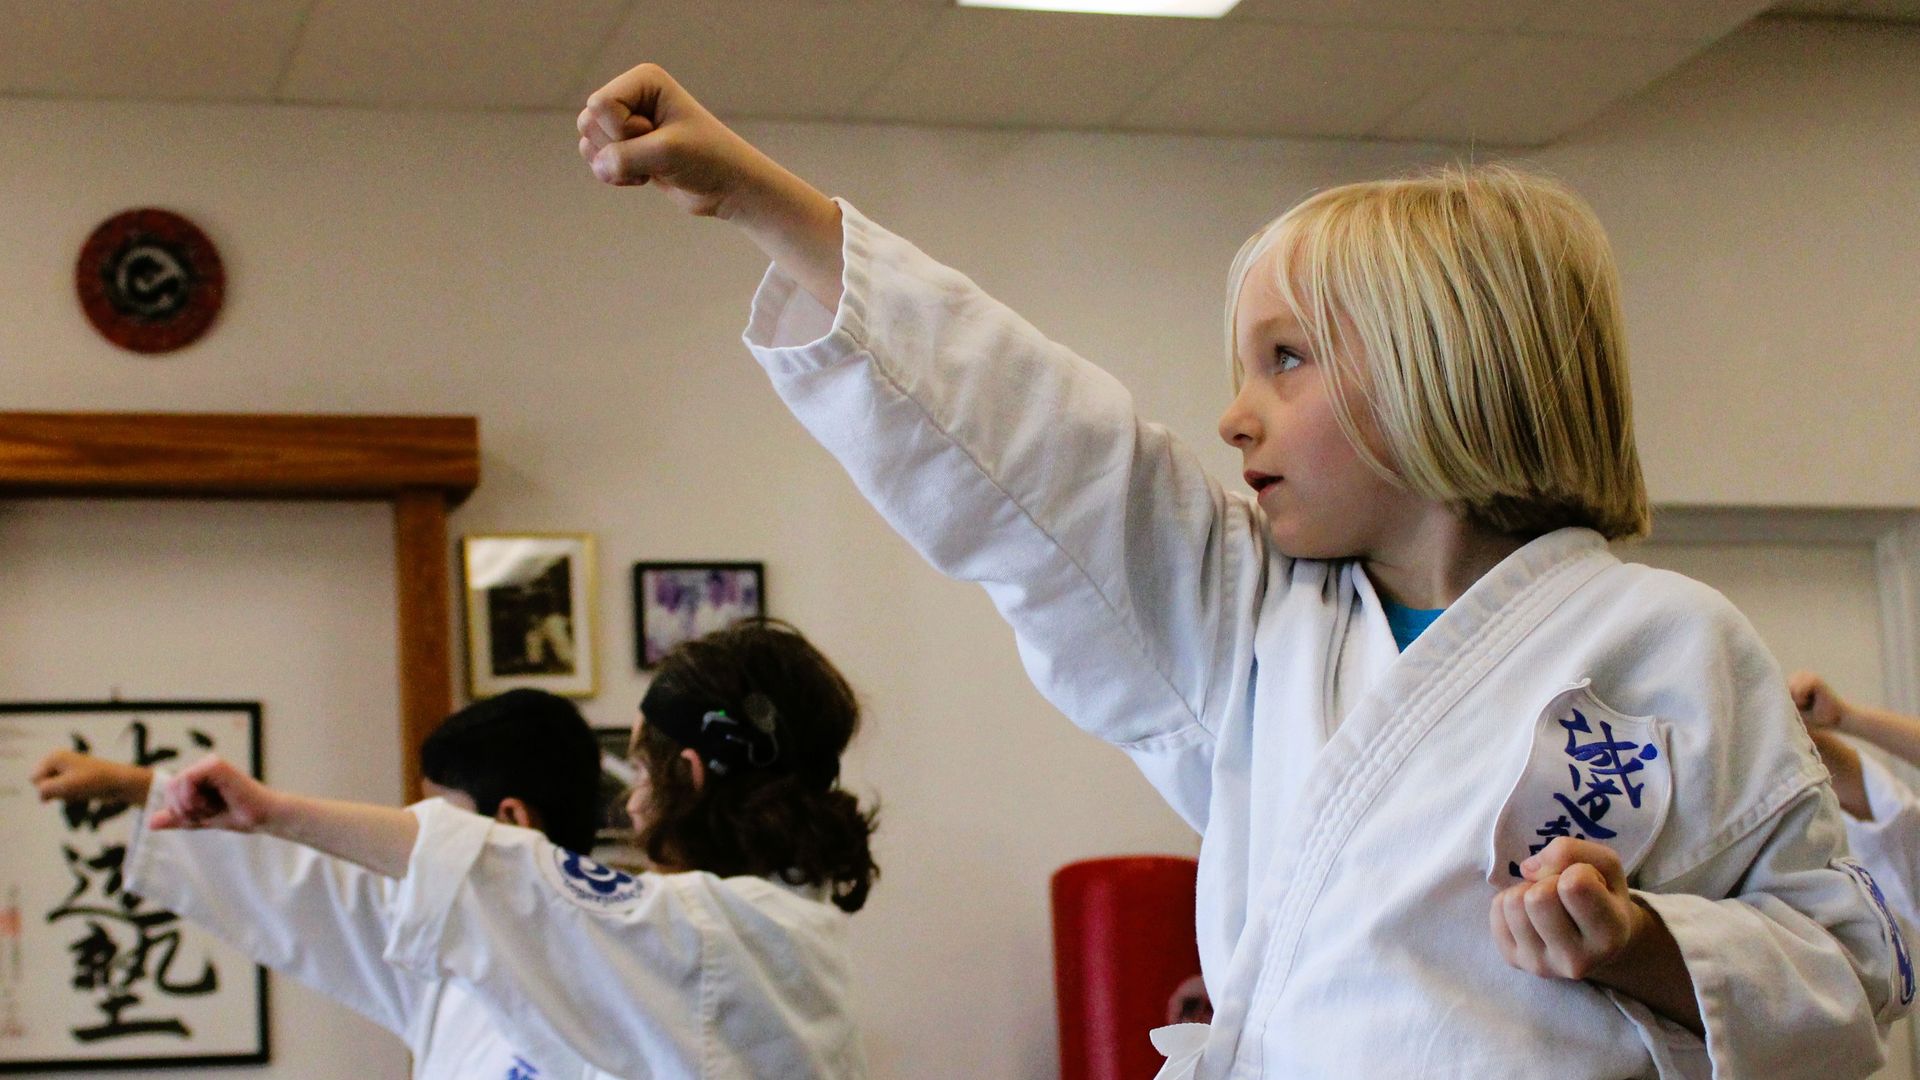 A child practices karate moves.